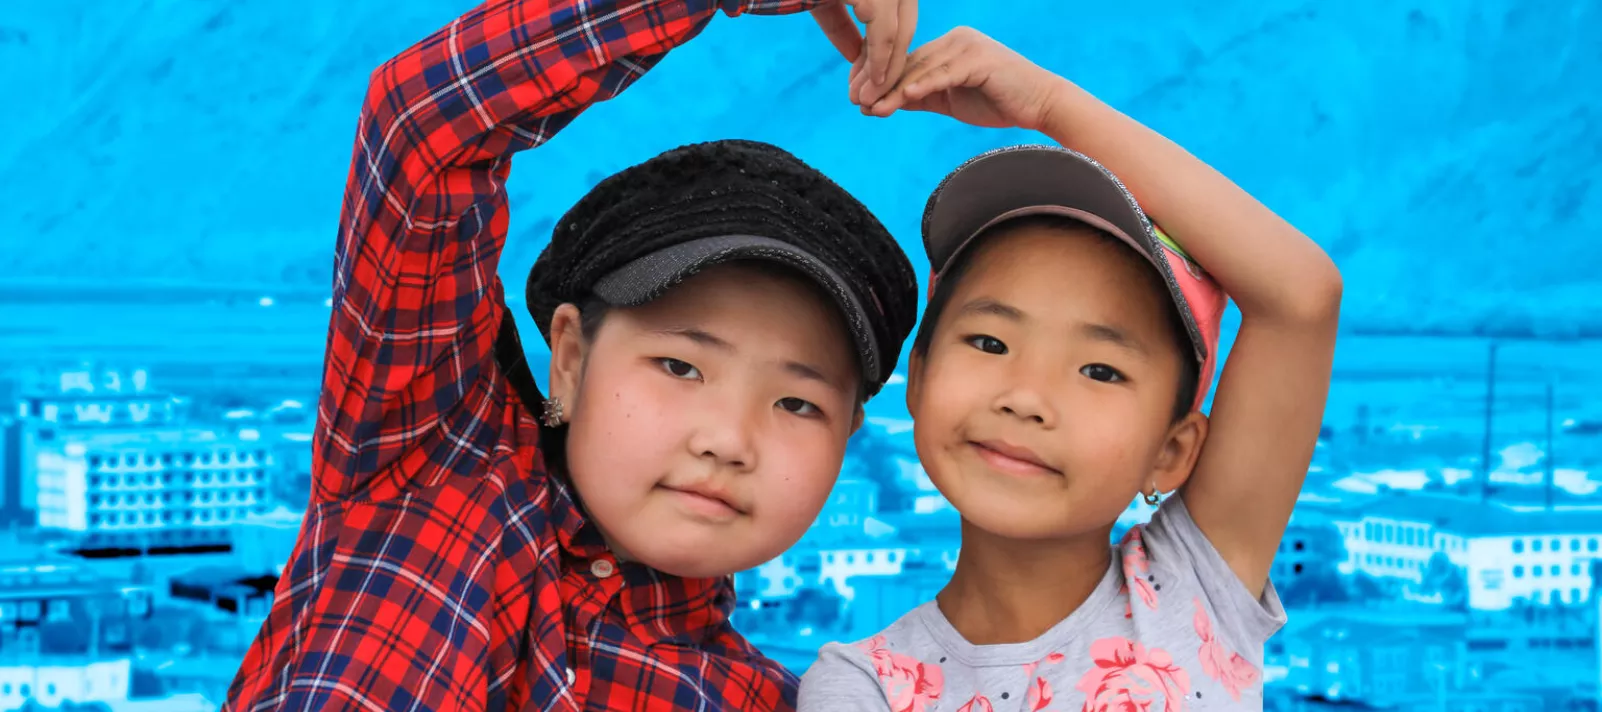 Children in Mongolia, 2020, form a heart with their arms.